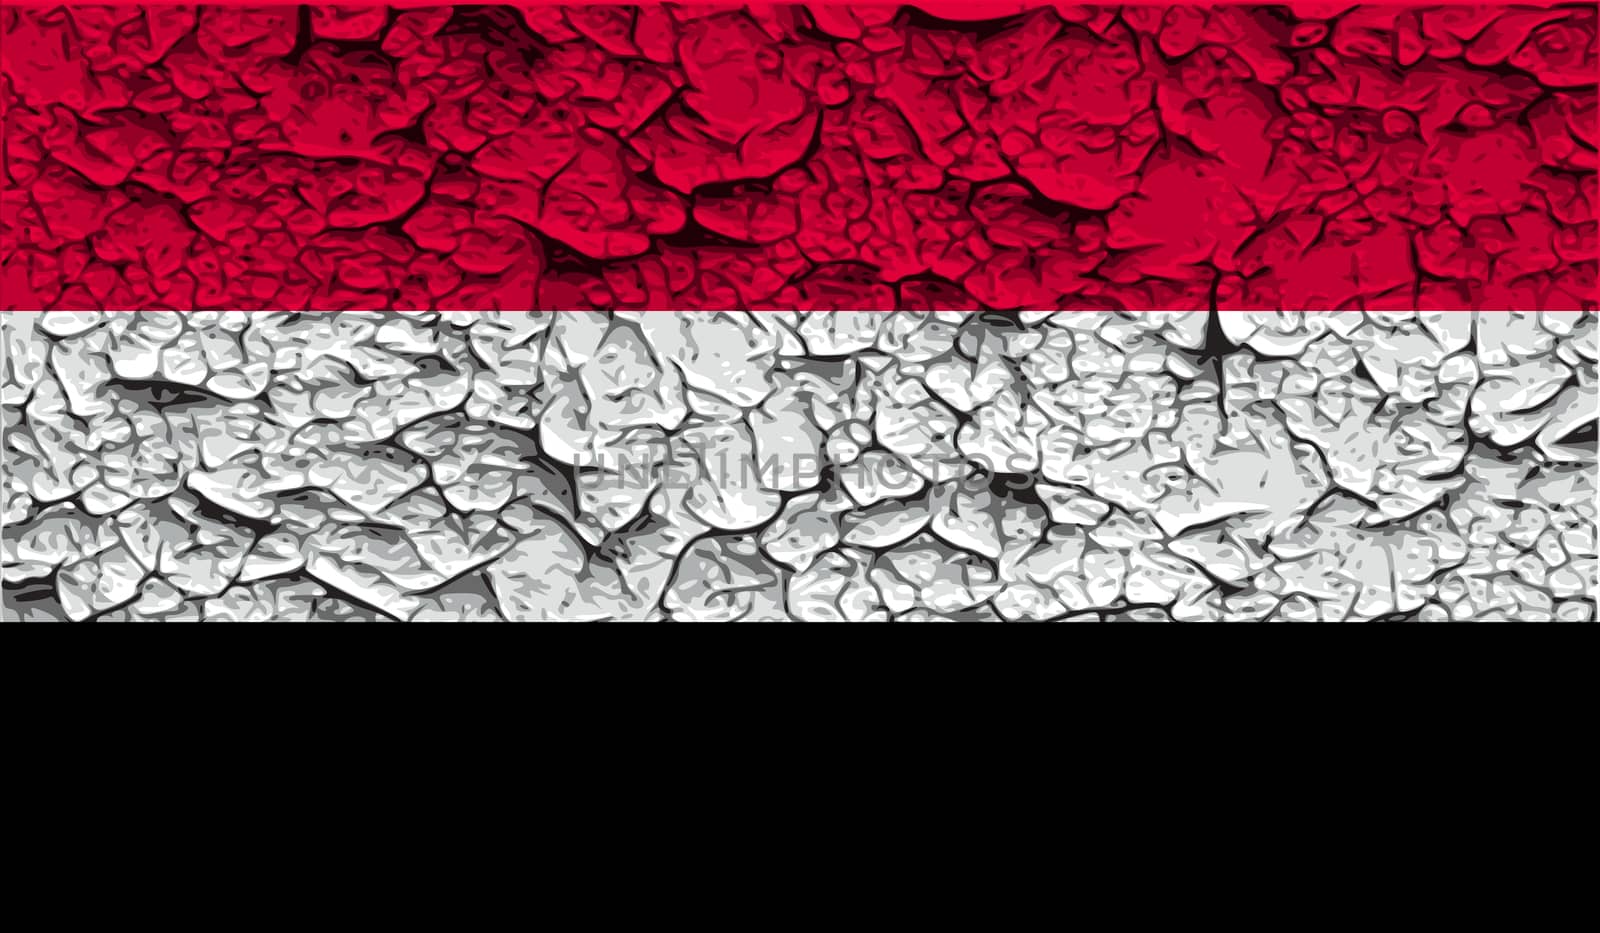 Flag of Yemen with old texture.  by serhii_lohvyniuk